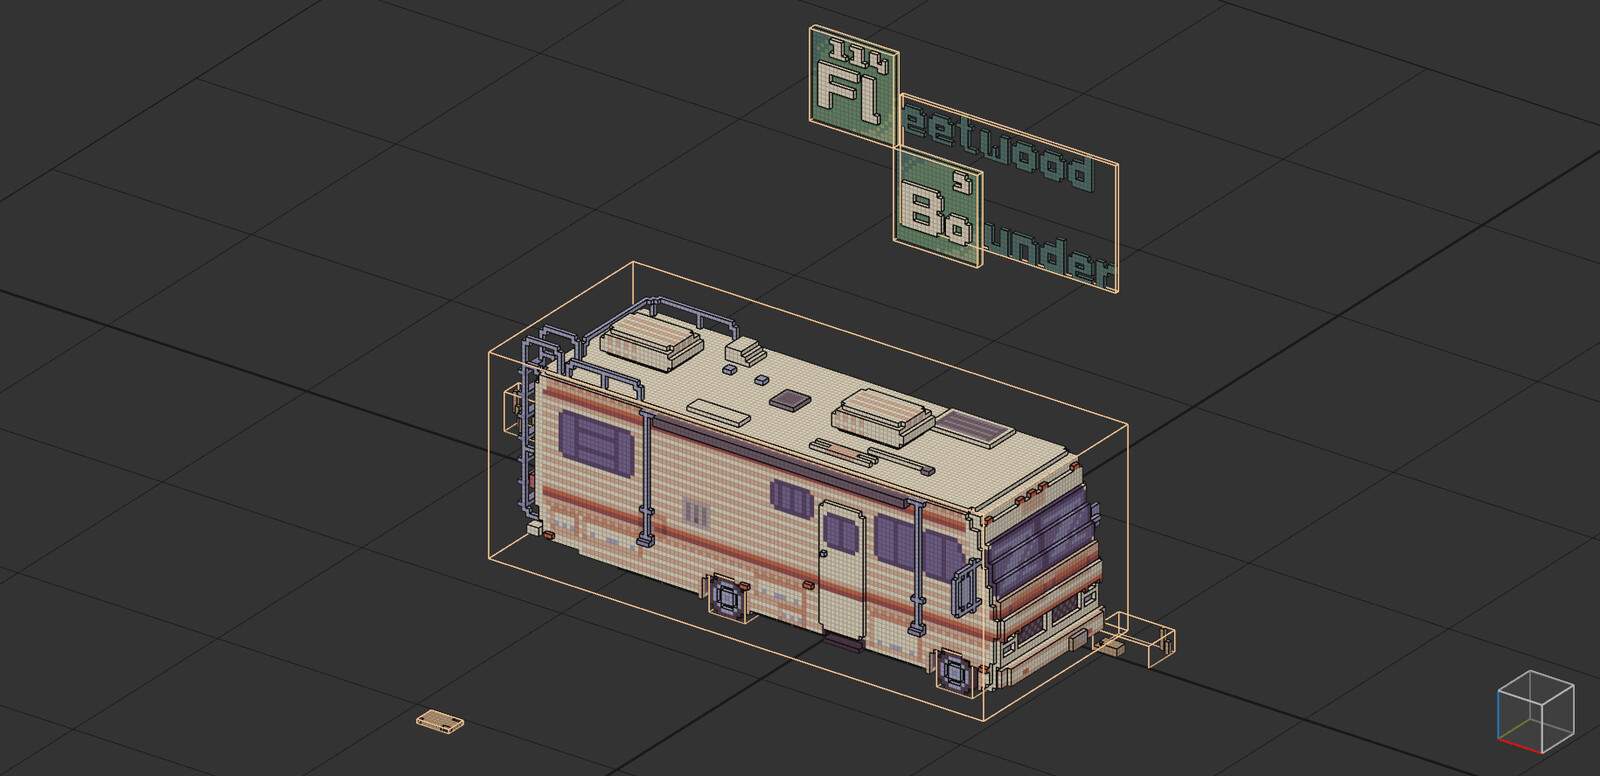 Screen capture of the The Crystal Ship model workspace within Magicavoxel.